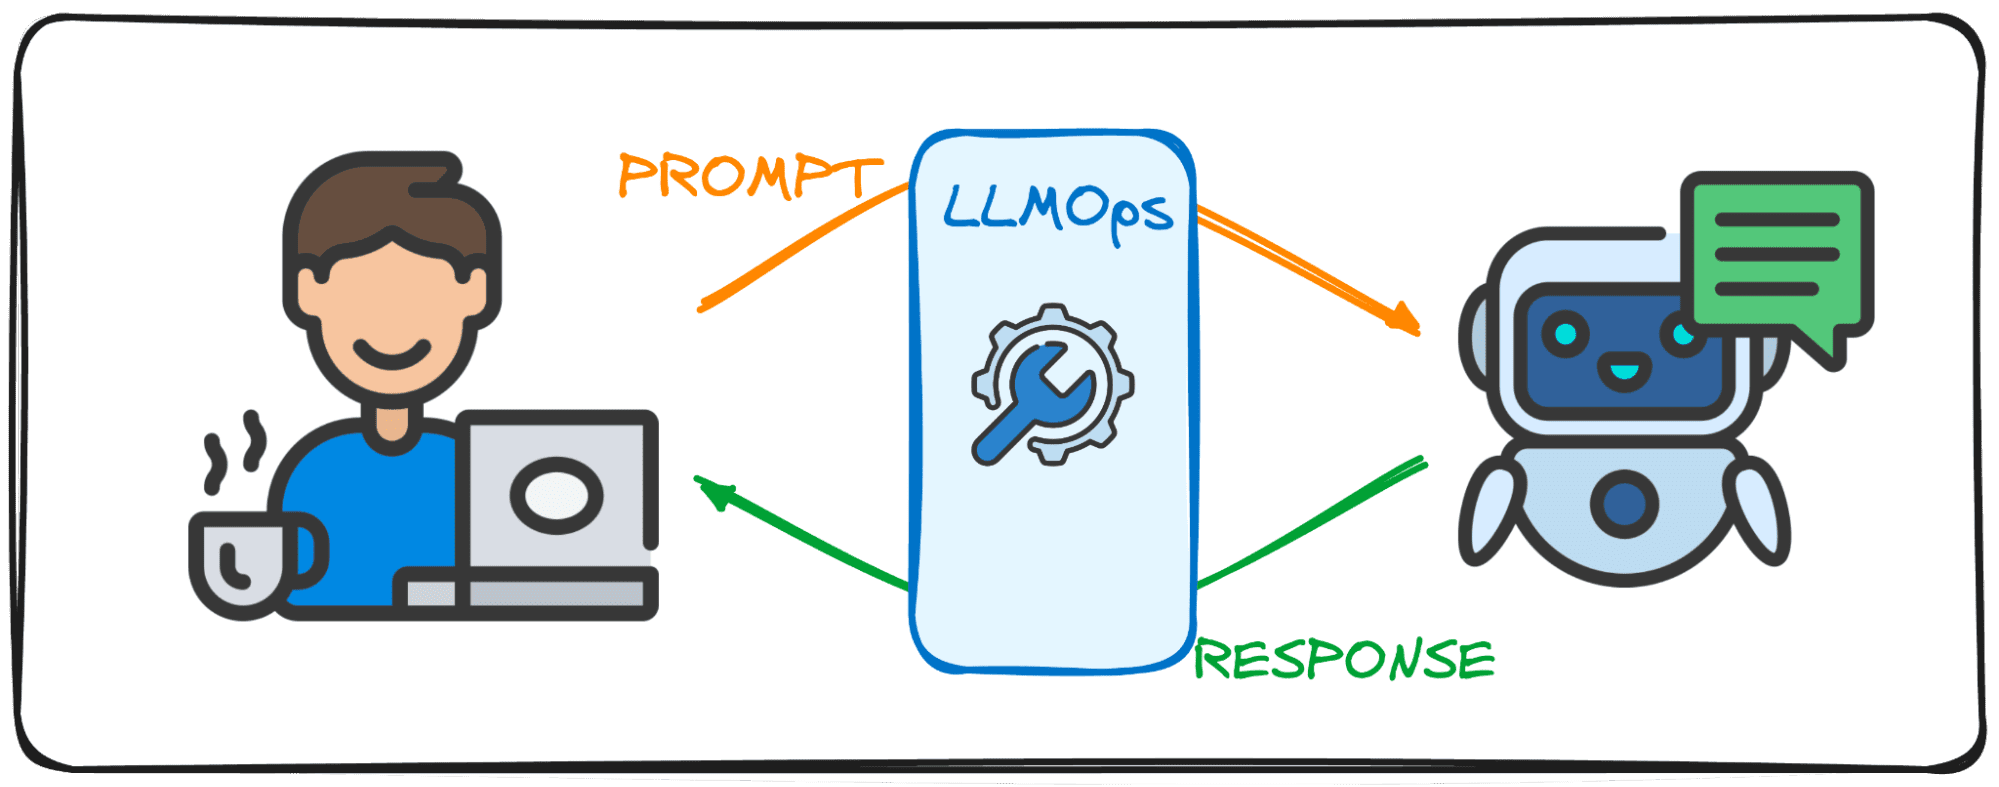 Getting Started with LLMOps: The Secret Sauce Behind Seamless Interactions